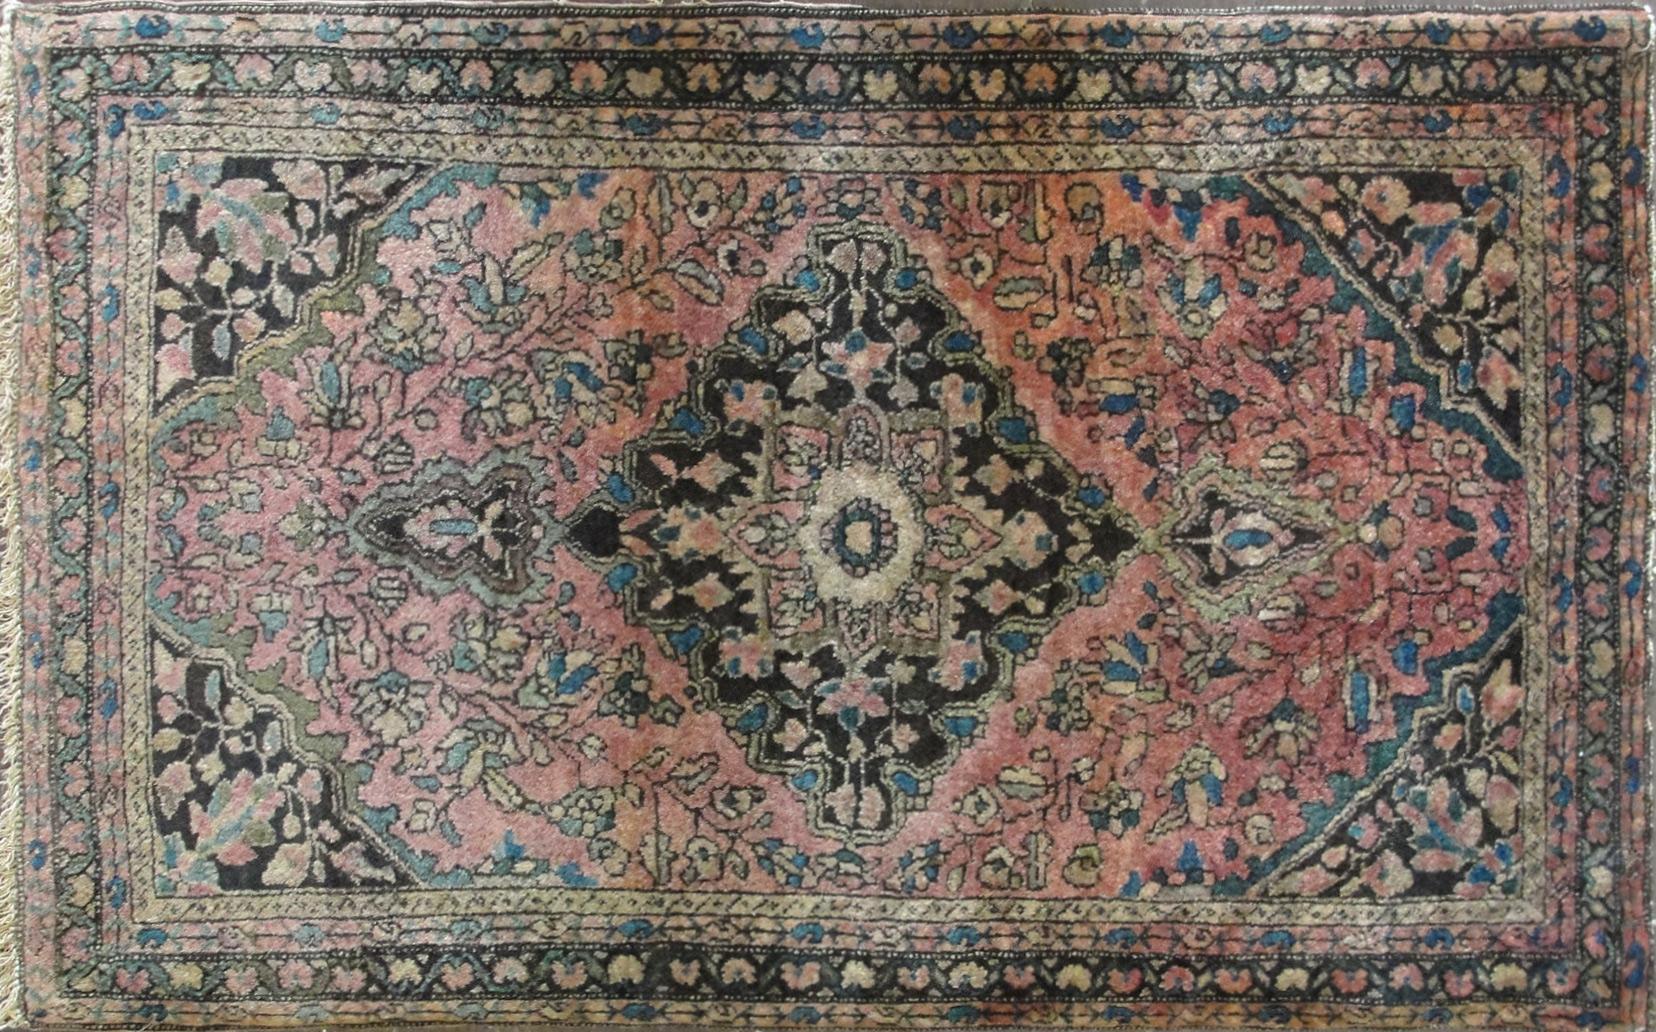 Fine antique Feraghan Sarouk from Chicago collection.
The Feraghan district located south of Tehran, encompassed the cities of Arak, Qum and Kashan, an area with a long and illustrious history of rug and carpet weaving. In the 19th century, many